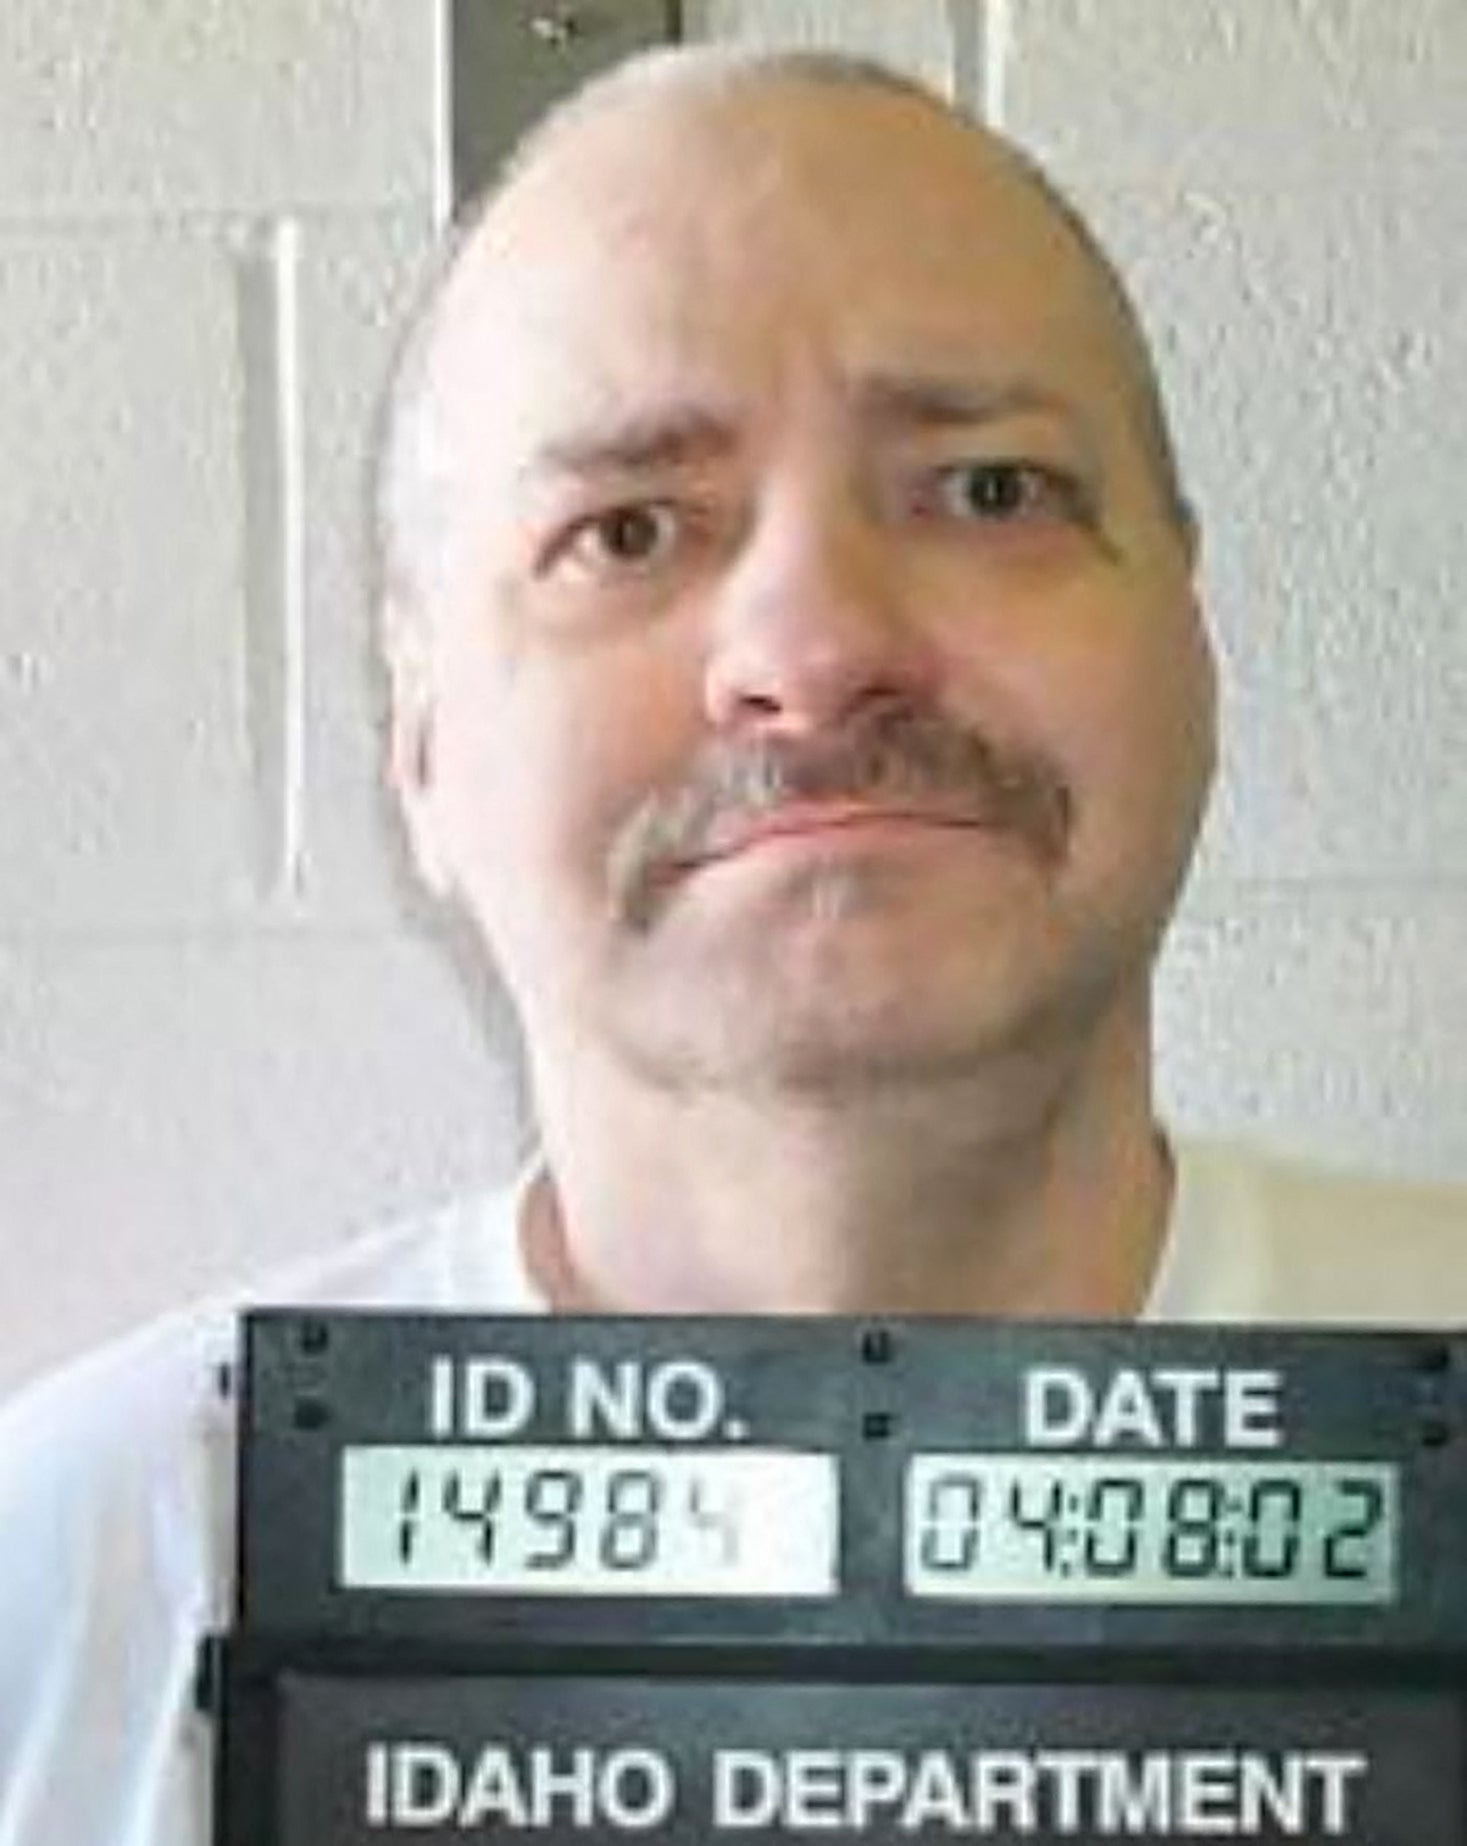 This April 8, 2002, image obtained from the Idaho Department of Correction shows death row inmate Thomas Creech